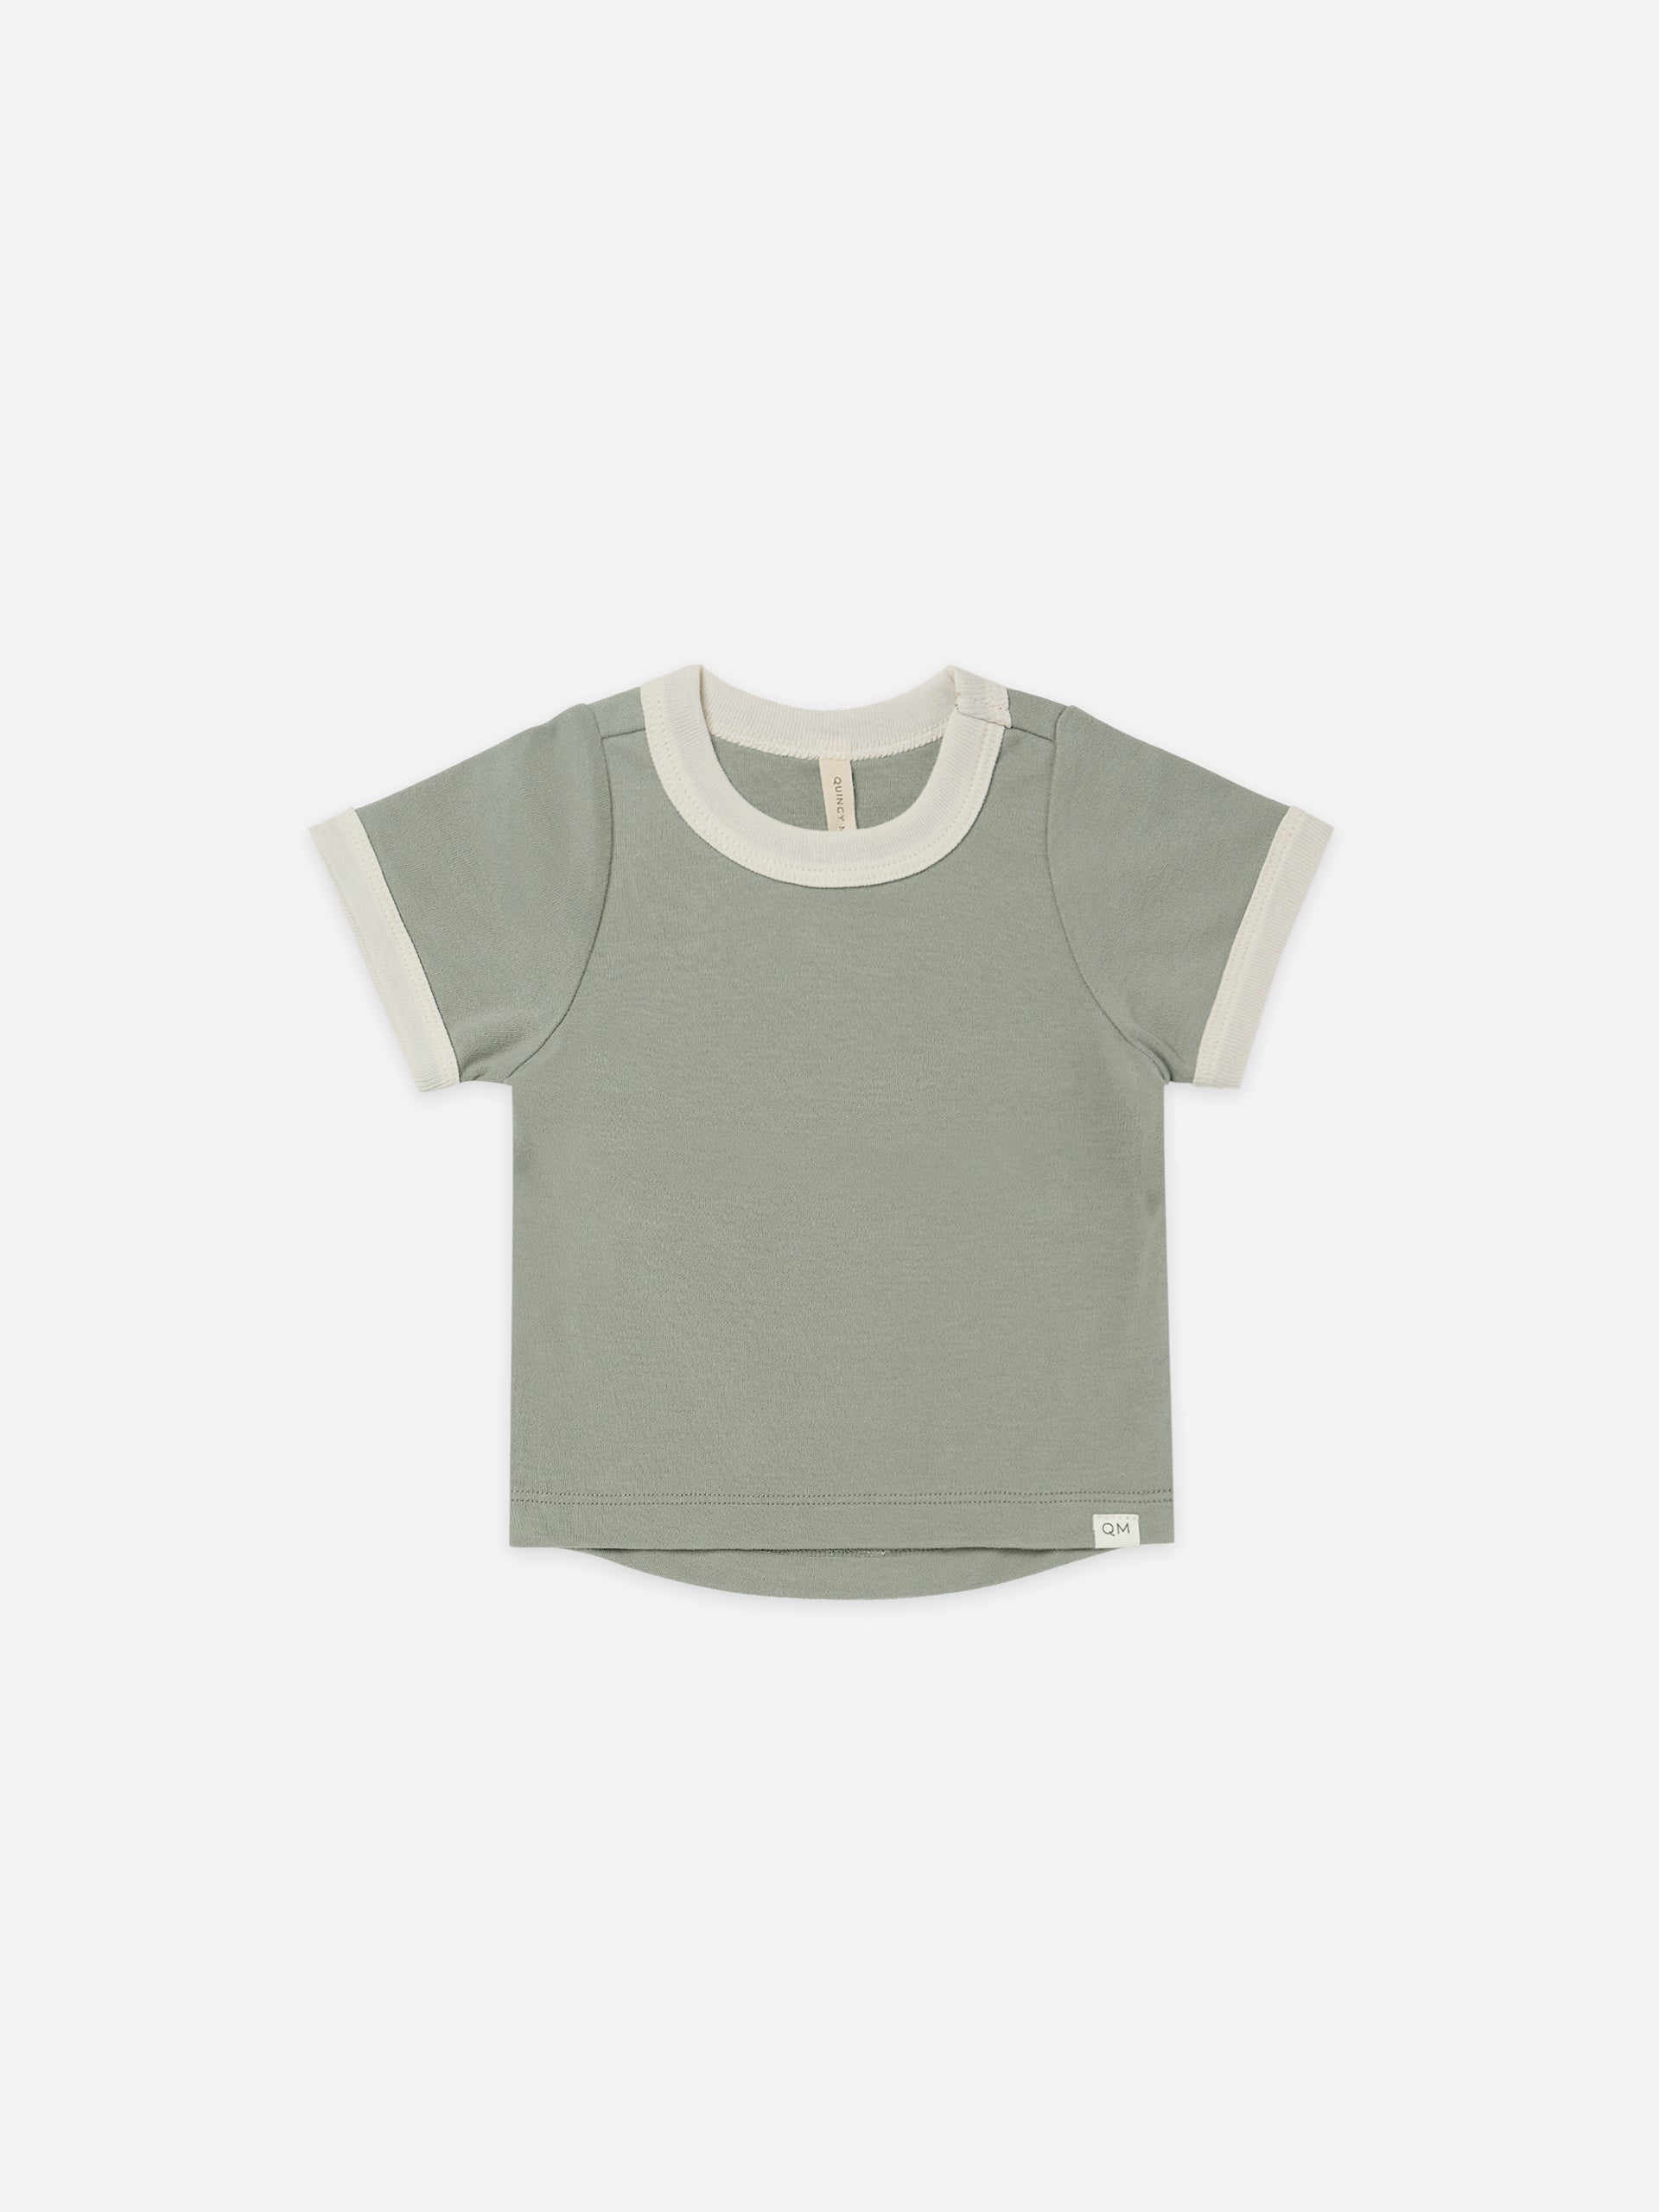 Quincy Mae Spruce Ringer Tee